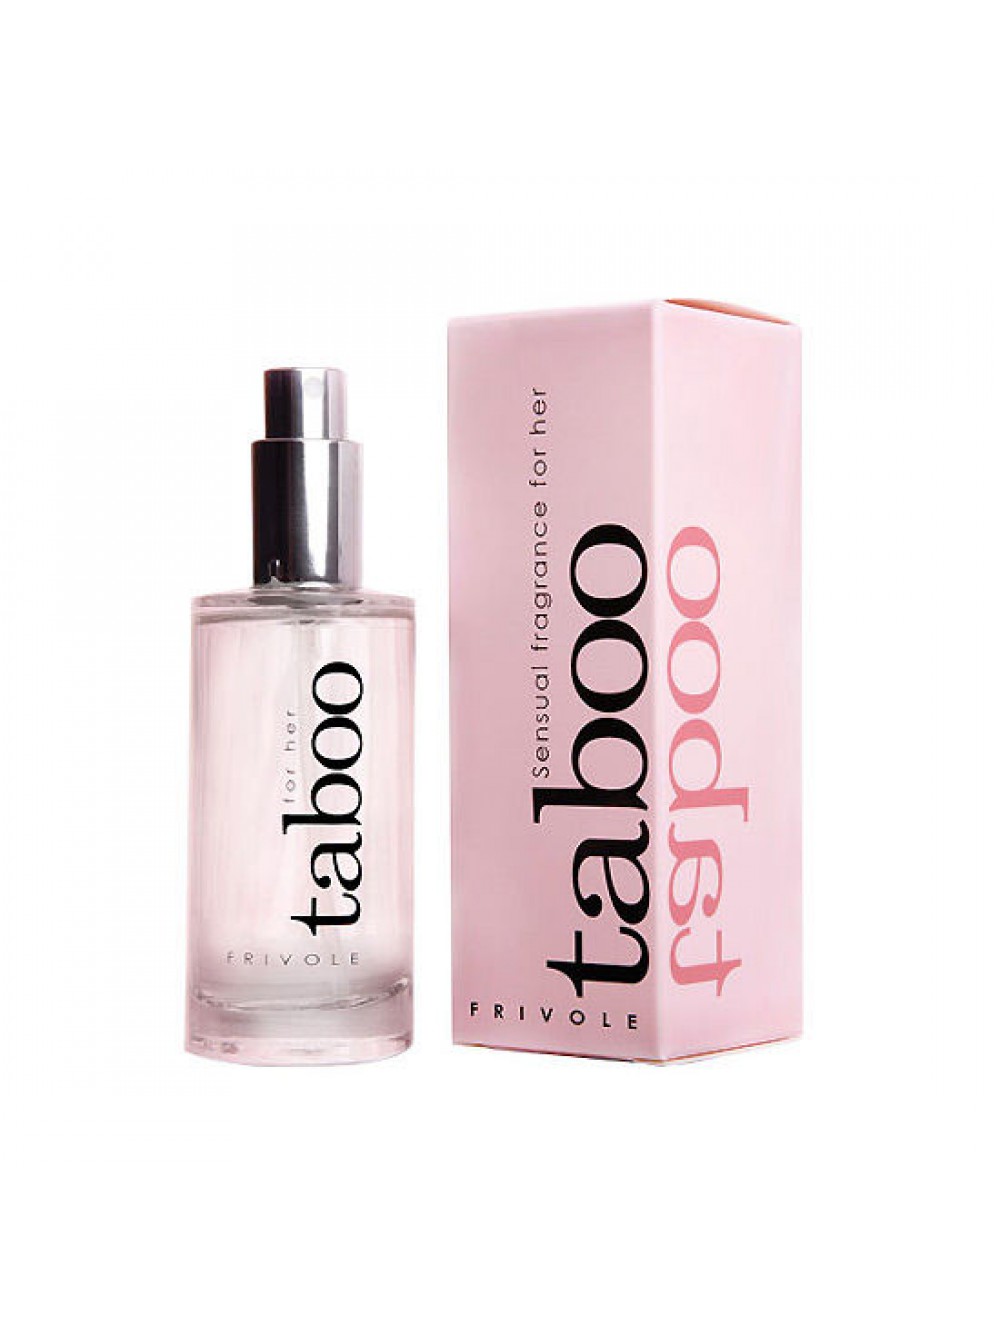 TABOO SENSUAL FRAGRANCE FOR HER